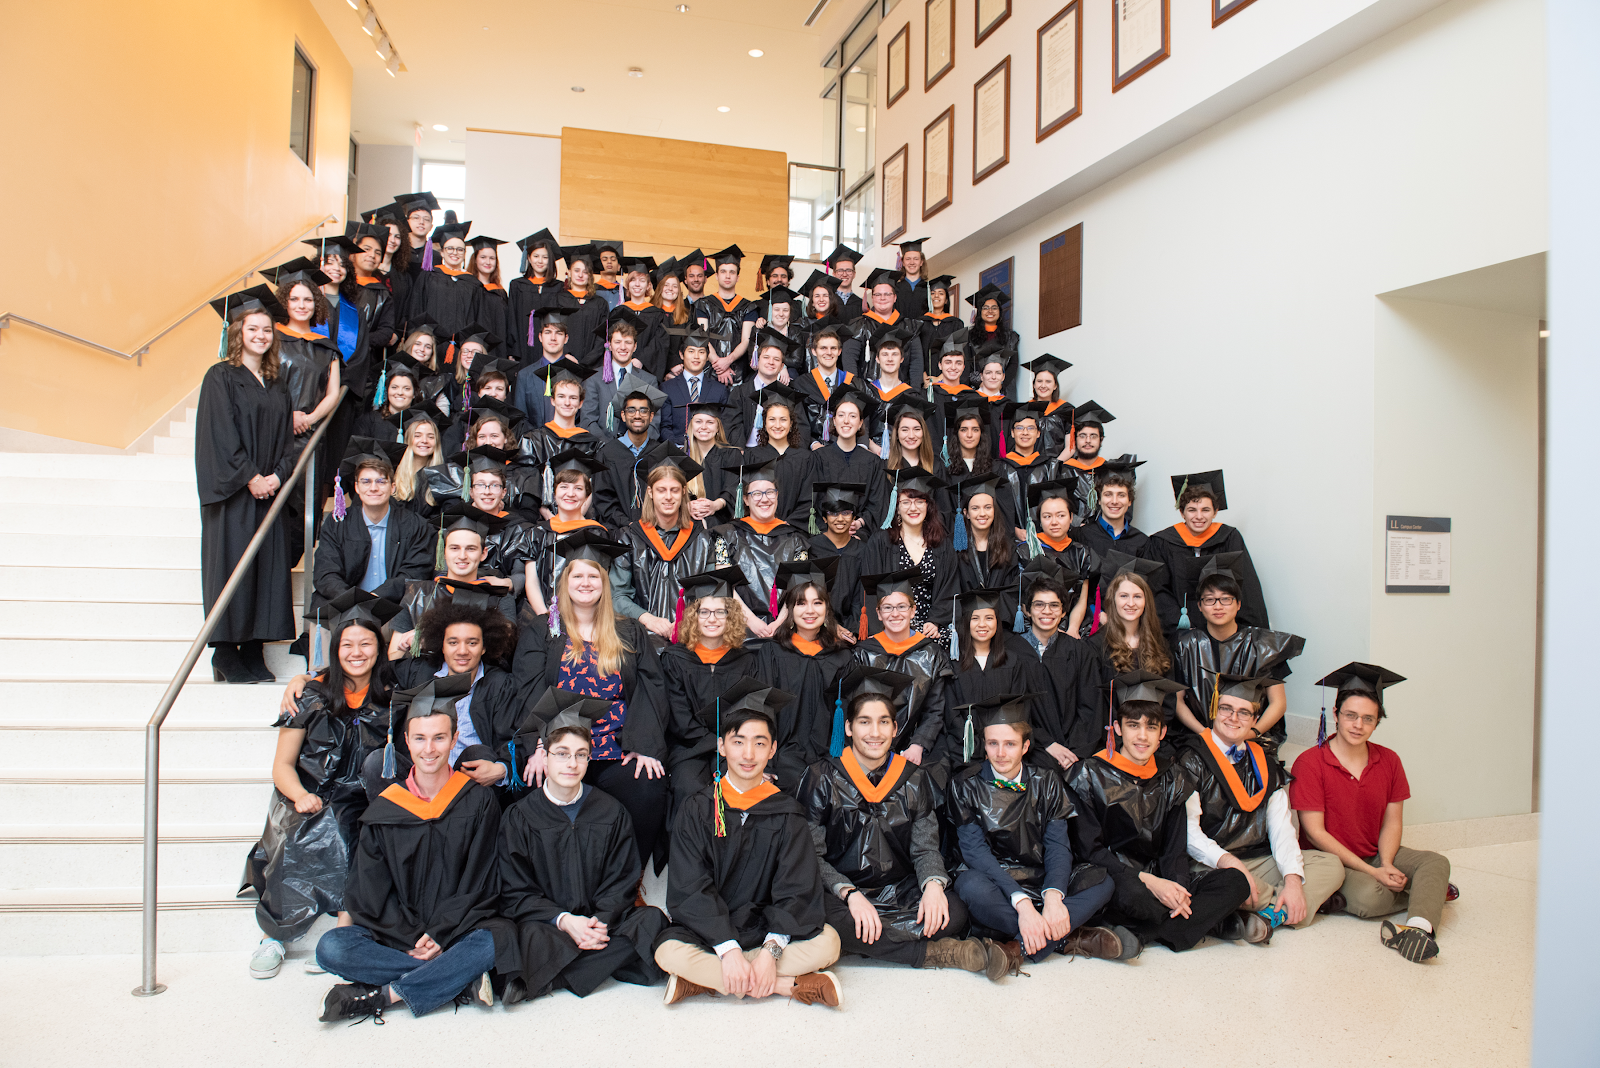 A group photo of people wearing graduation caps and gowns, some of which appear to be homemade.